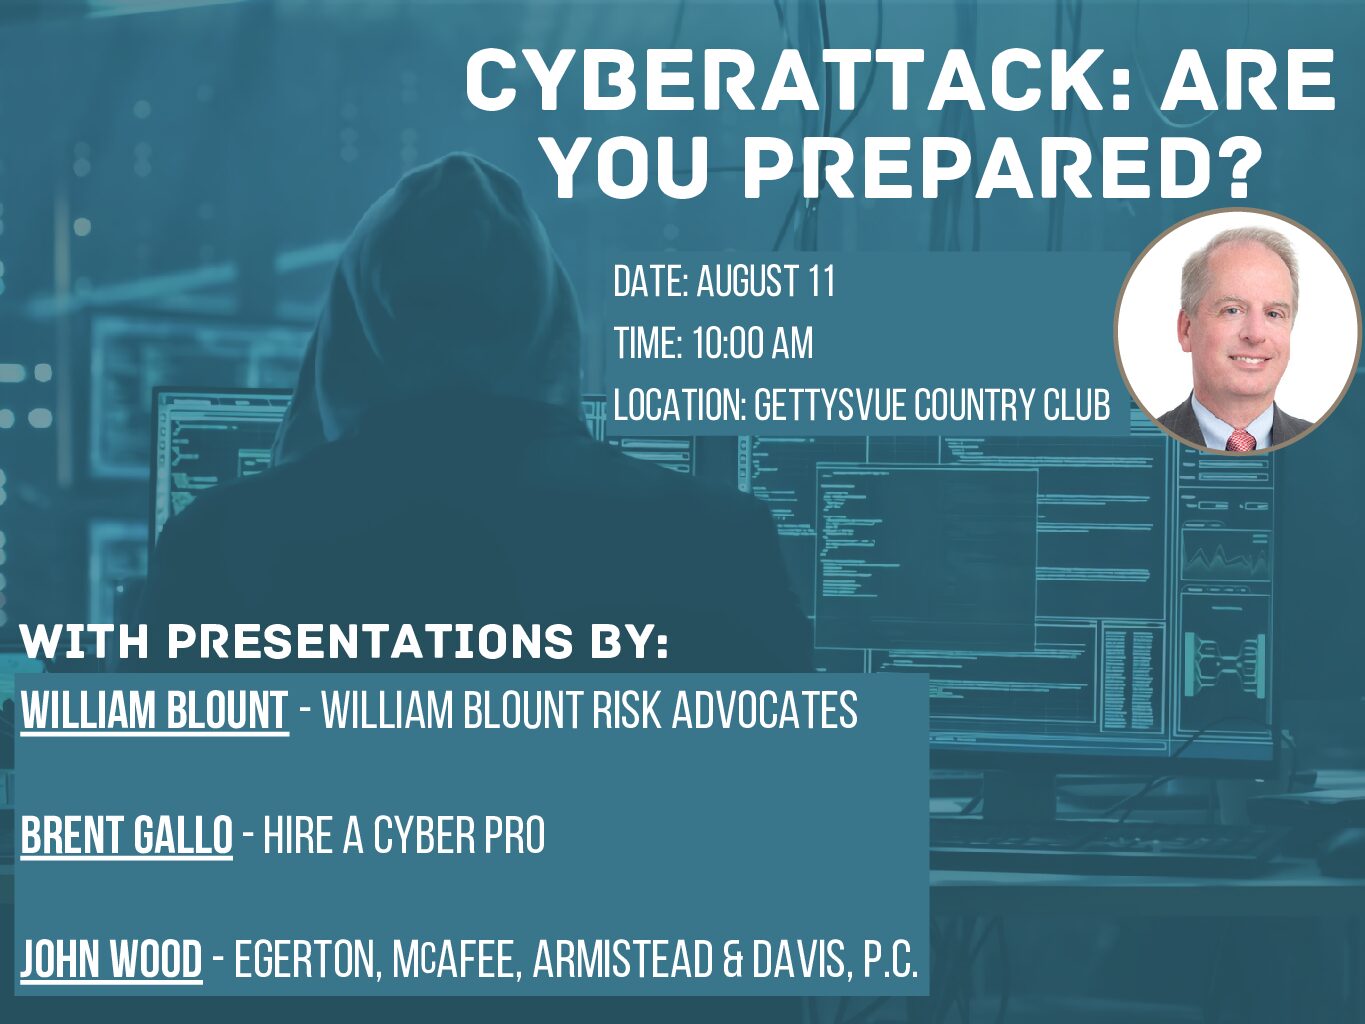 Upcoming Event! Egerton McAfee Attorney, John Wood, Presents at: Cyberattack: Are You Prepared?